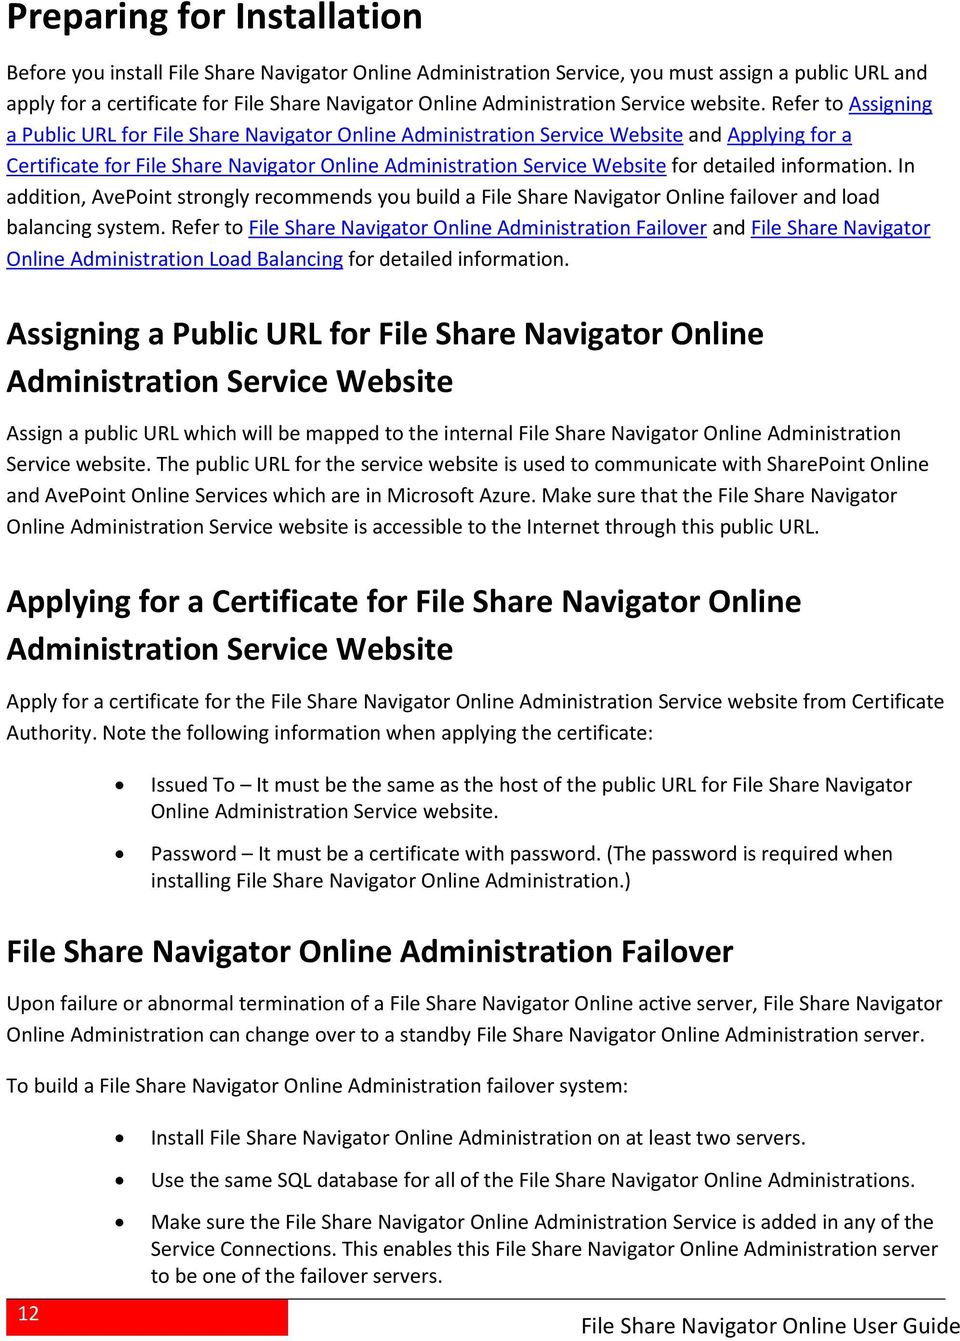 Refer to Assigning a Public URL for File Share Navigator Online Administration Service Website and Applying for a Certificate for File Share Navigator Online Administration Service Website for